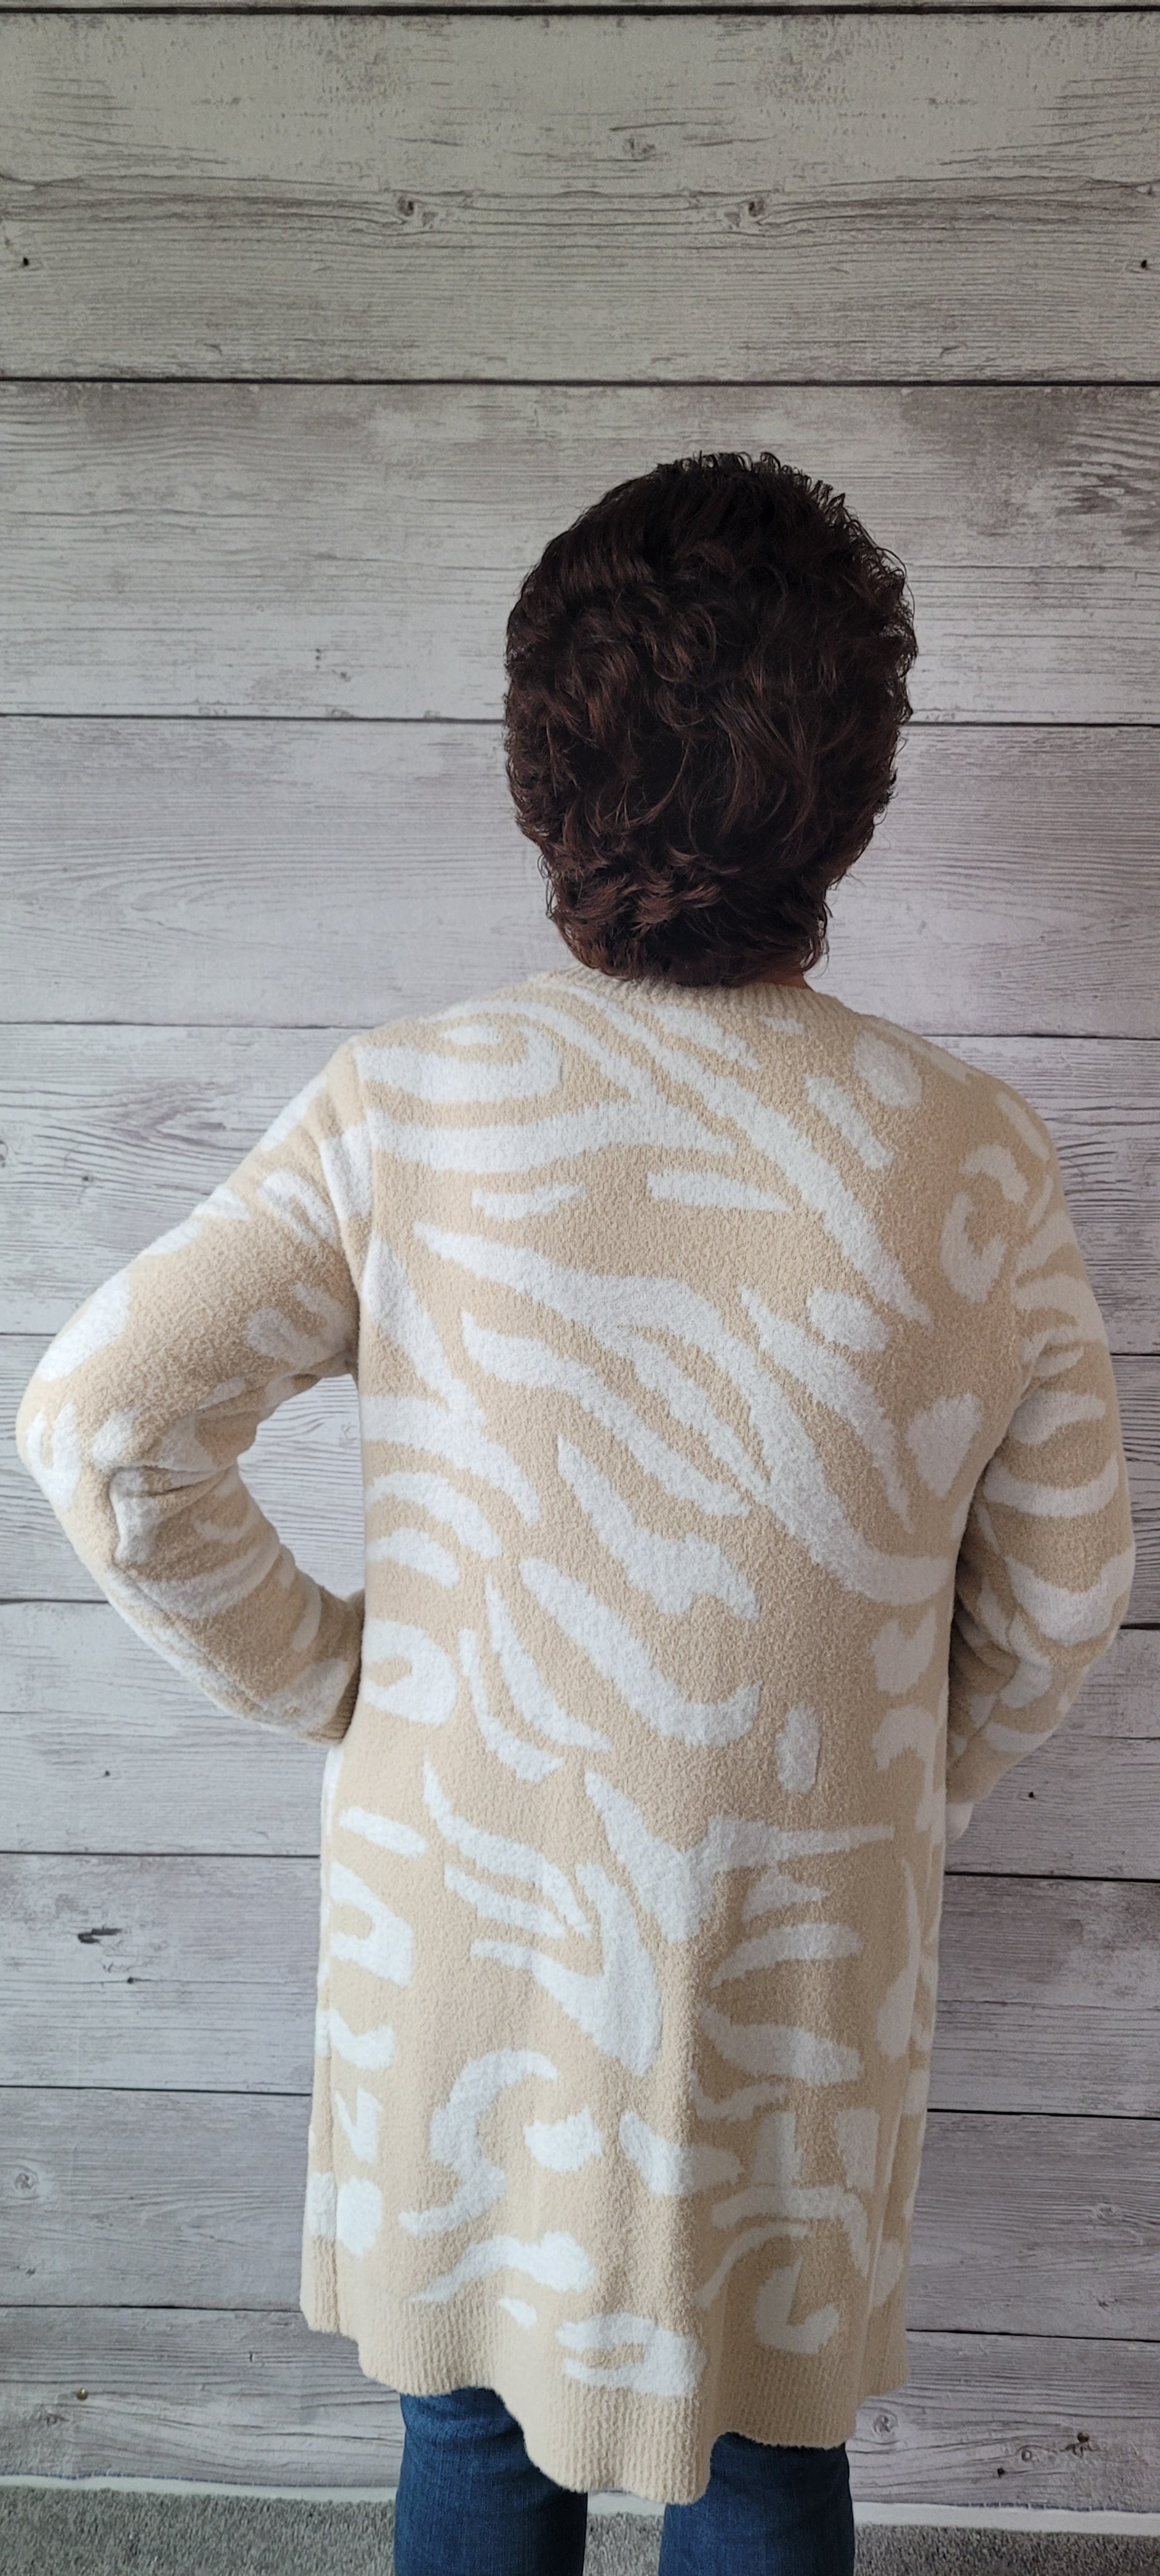 Snuggle up and stay warm in this very soft Dylan beige and ivory animal print cardigan! Flaunt your wild side and show off the cozy vibes in the most stylish way. (It's the purr-fect layering piece!) Sizes small through large.